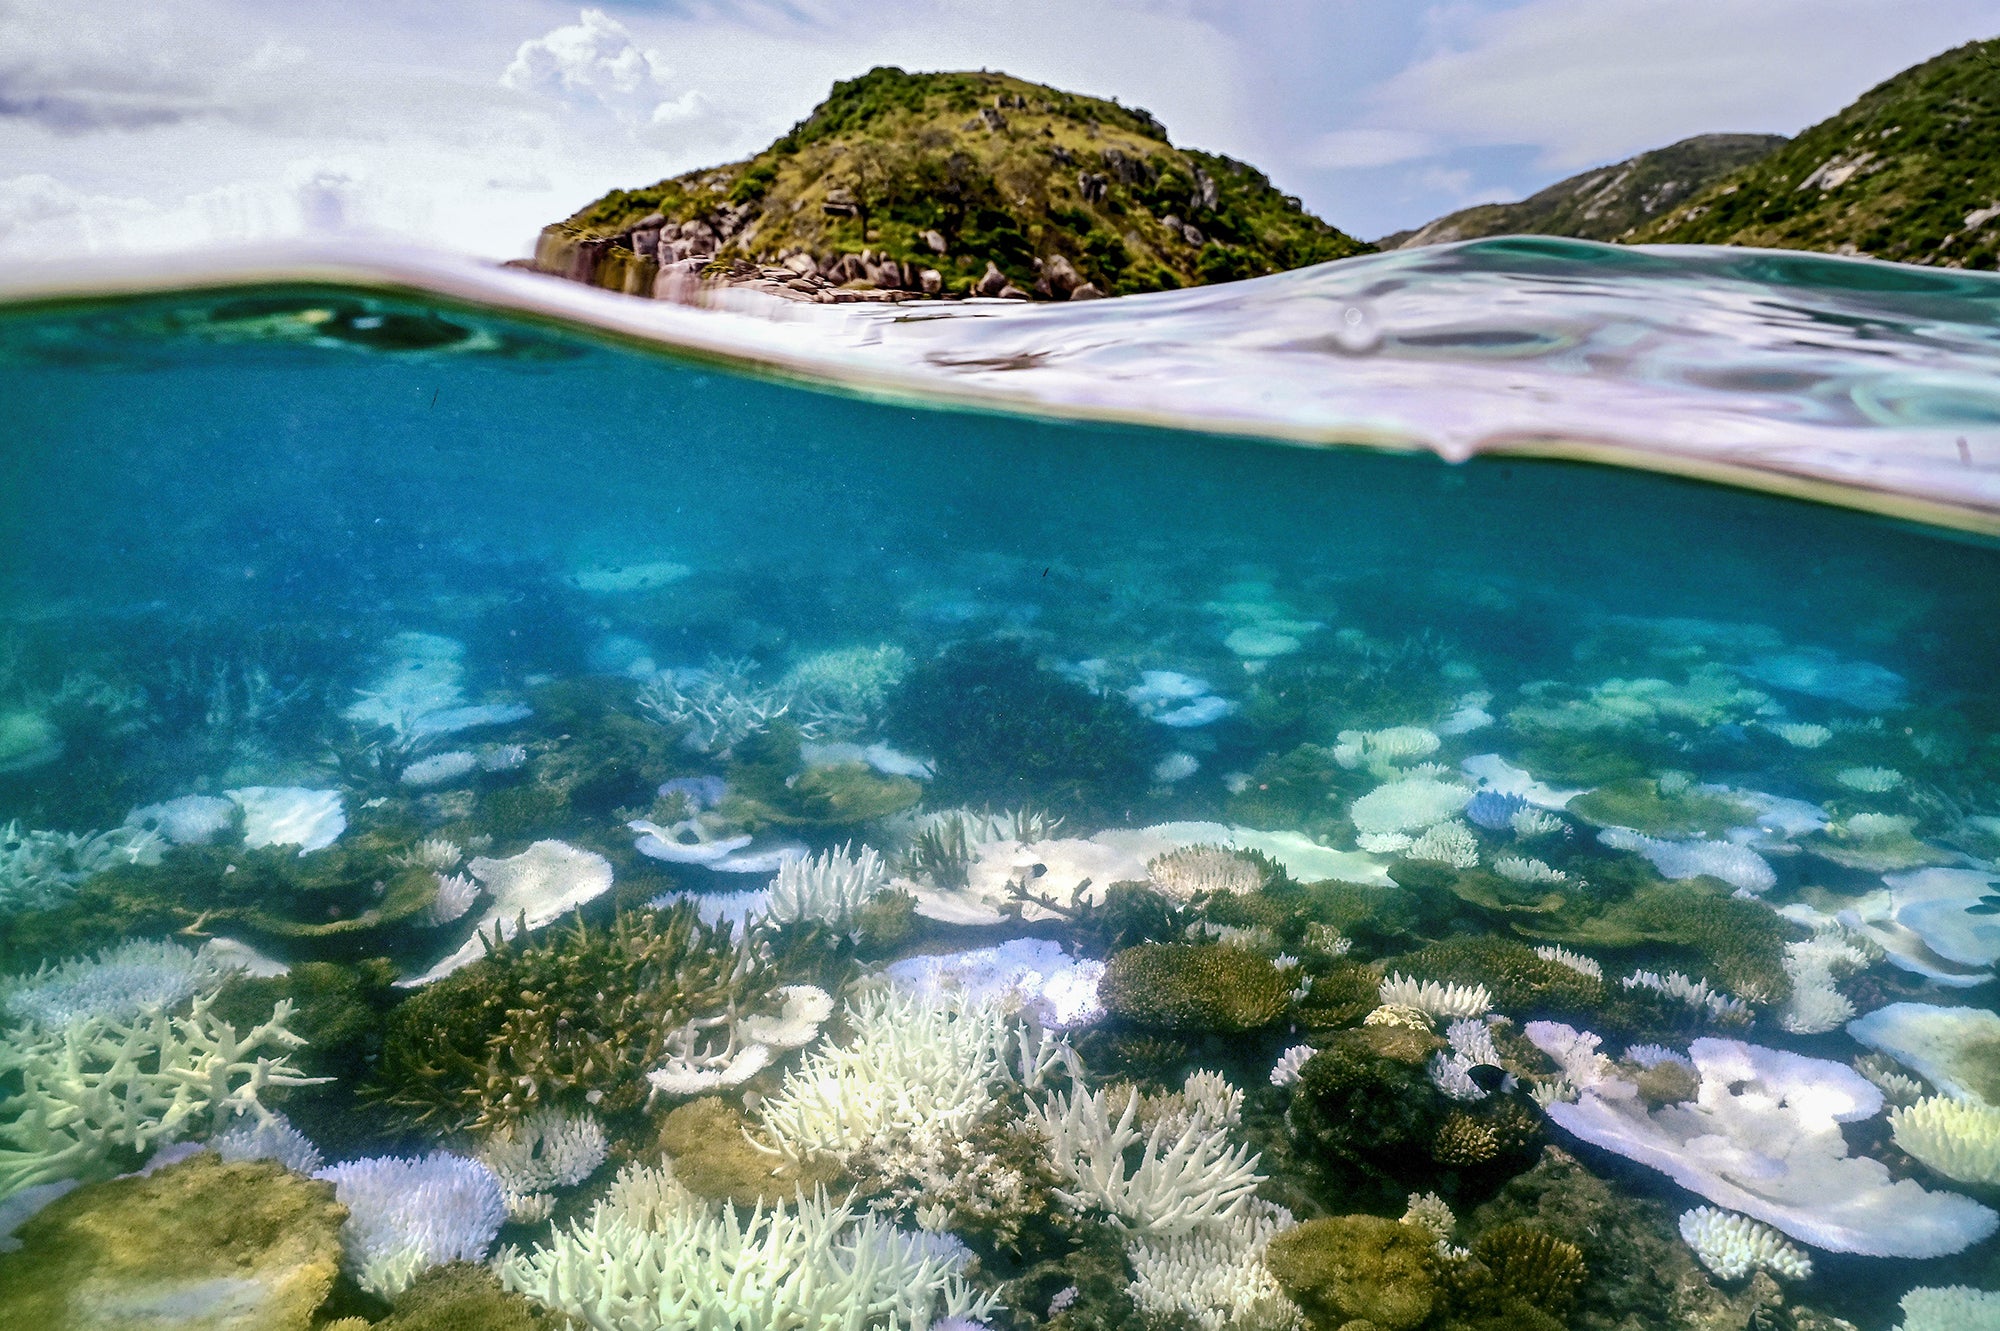 Coral in the ocean off of Lizard Island on the Great Barrier Reef. At the bottom of the frame the reef can be seen underwater with bleached and dead coral. At the top of the frame is the above water view of sky and hills.